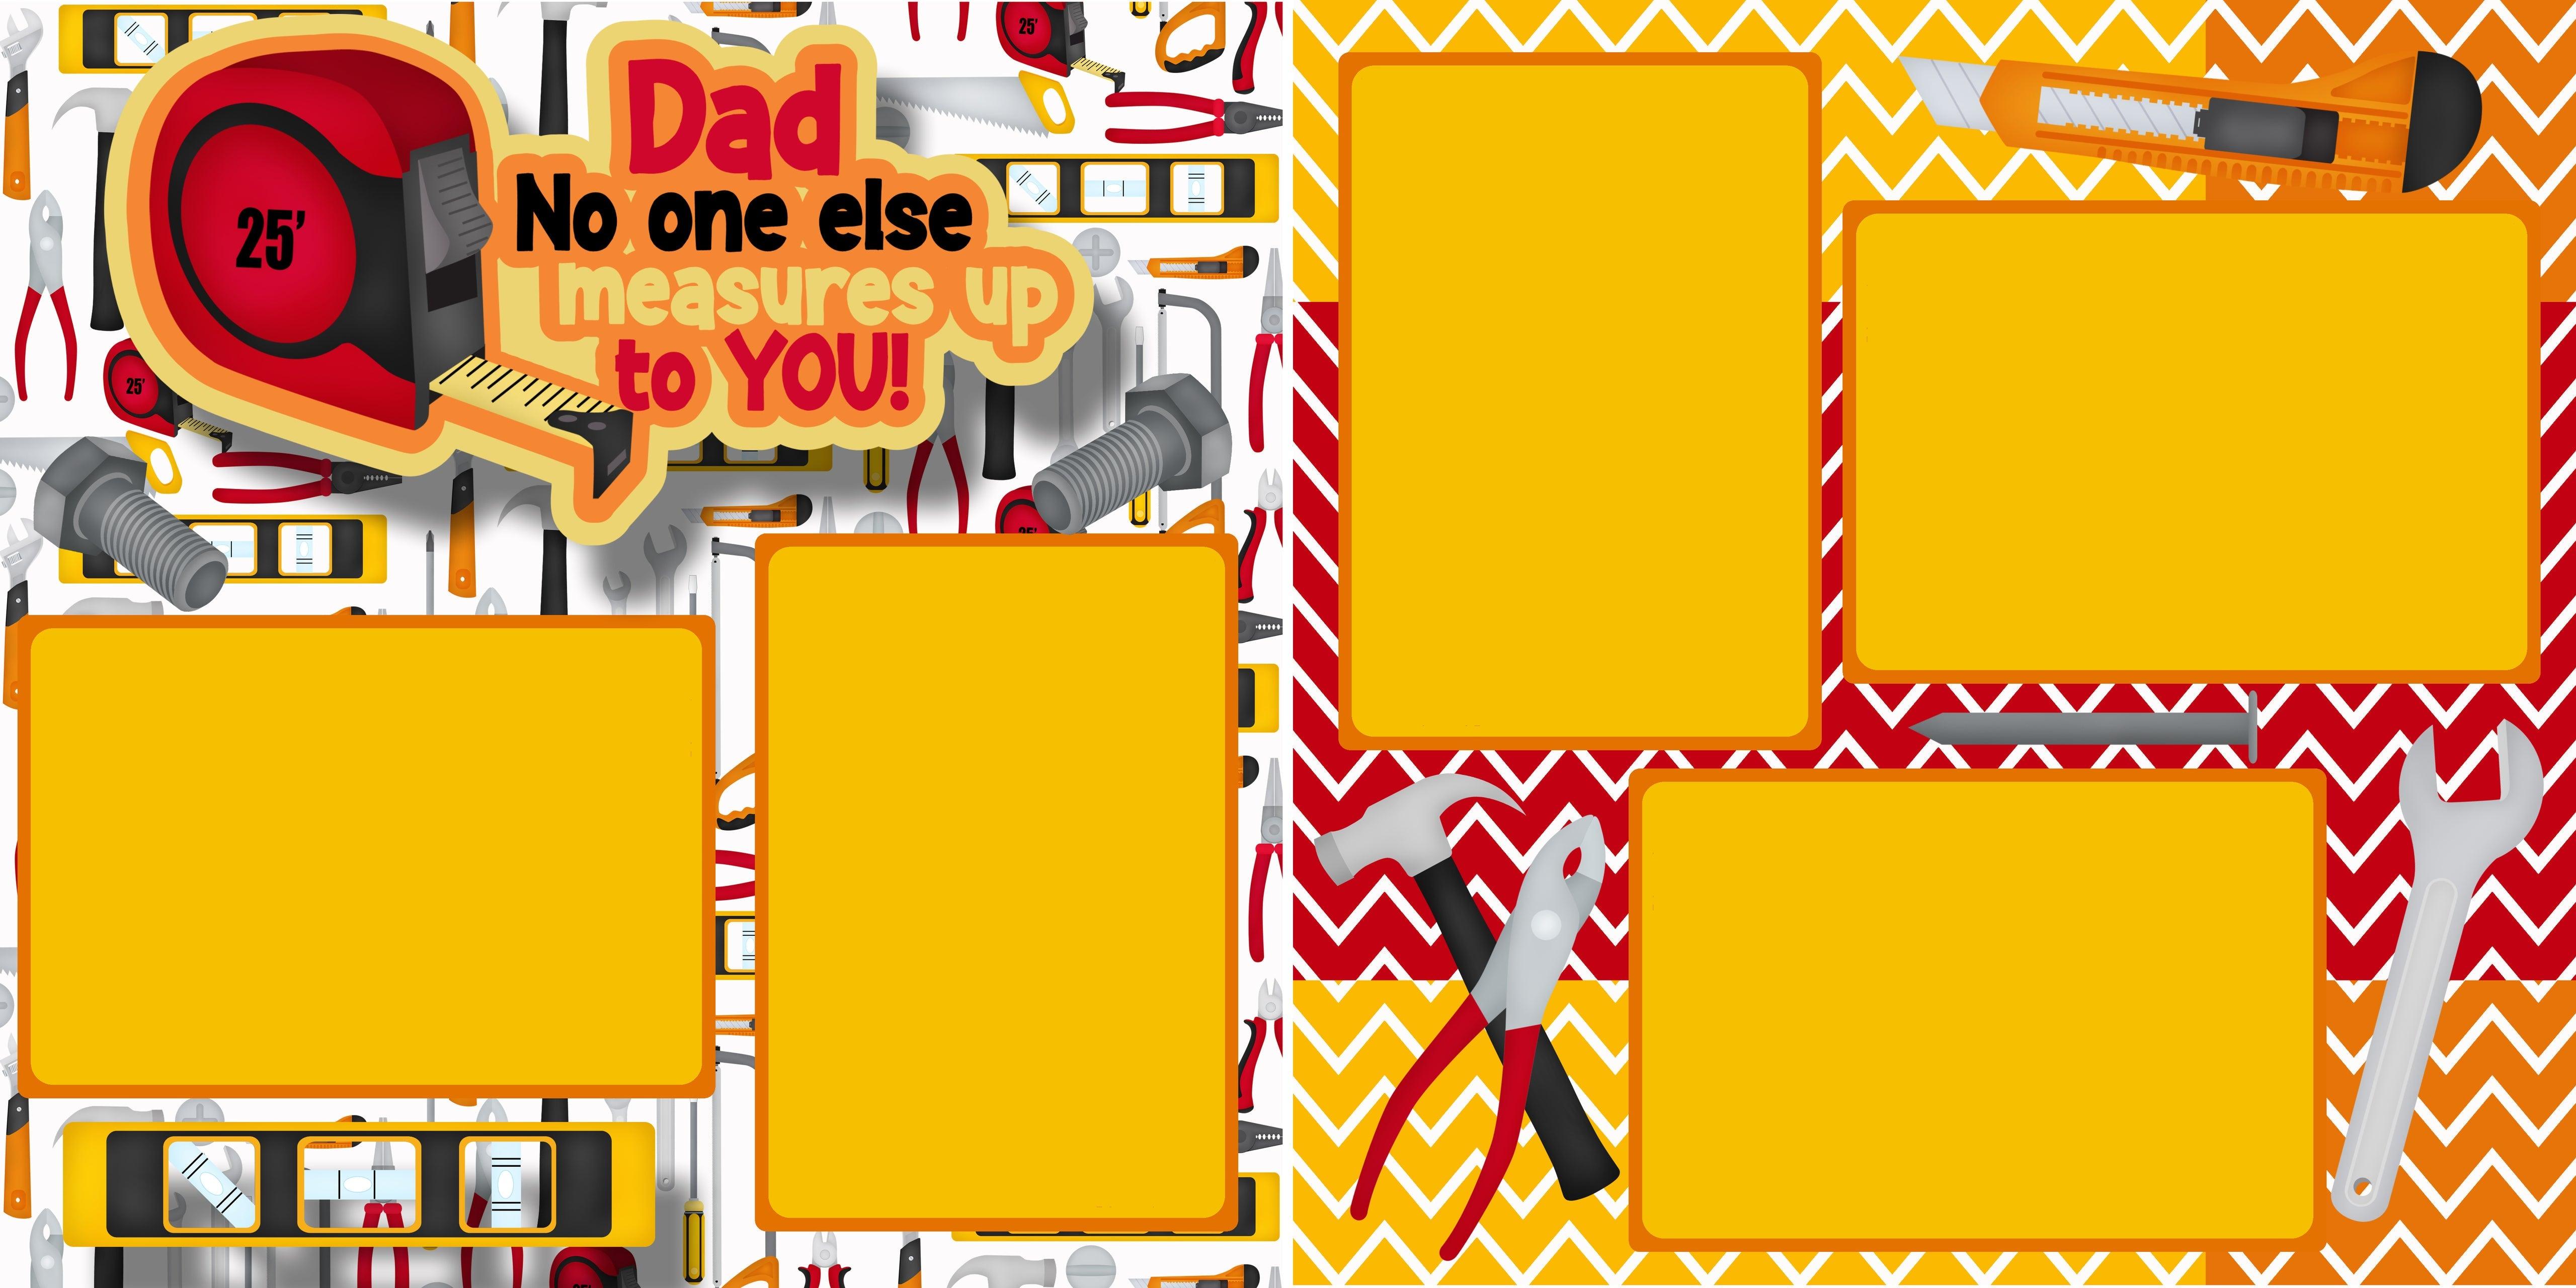 Father's Day Measures Up To You (2) - 12 x 12 Premade, Printed Scrapbook Pages by SSC Designs - Scrapbook Supply Companies